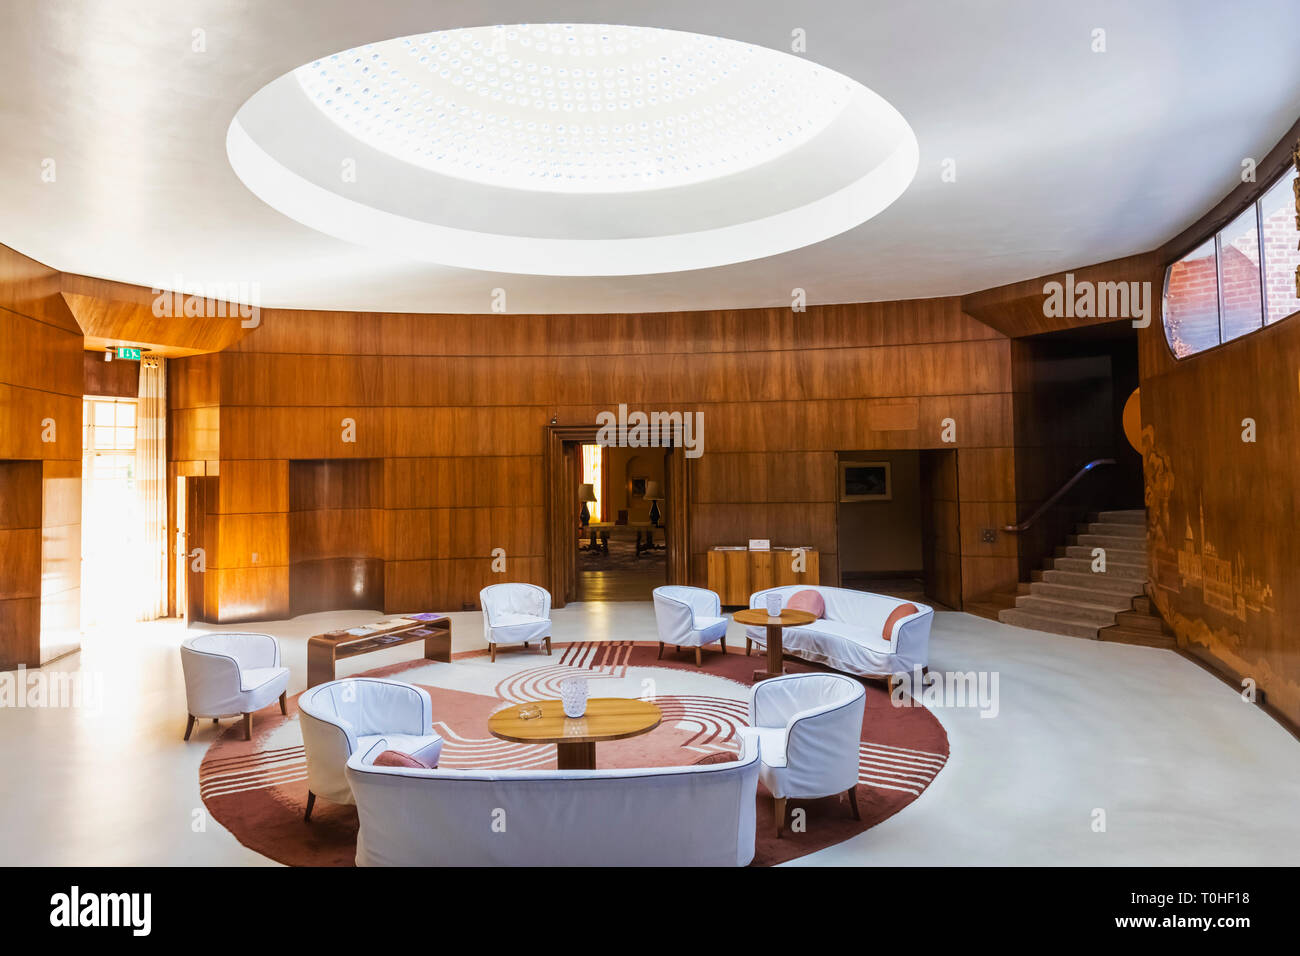 England, London, Greenwich, Eltham Palace, The Art Deco Former Home of Millionaires Stephen and Virginia Courtauld, Interior View of The Entrance Hall Stock Photo